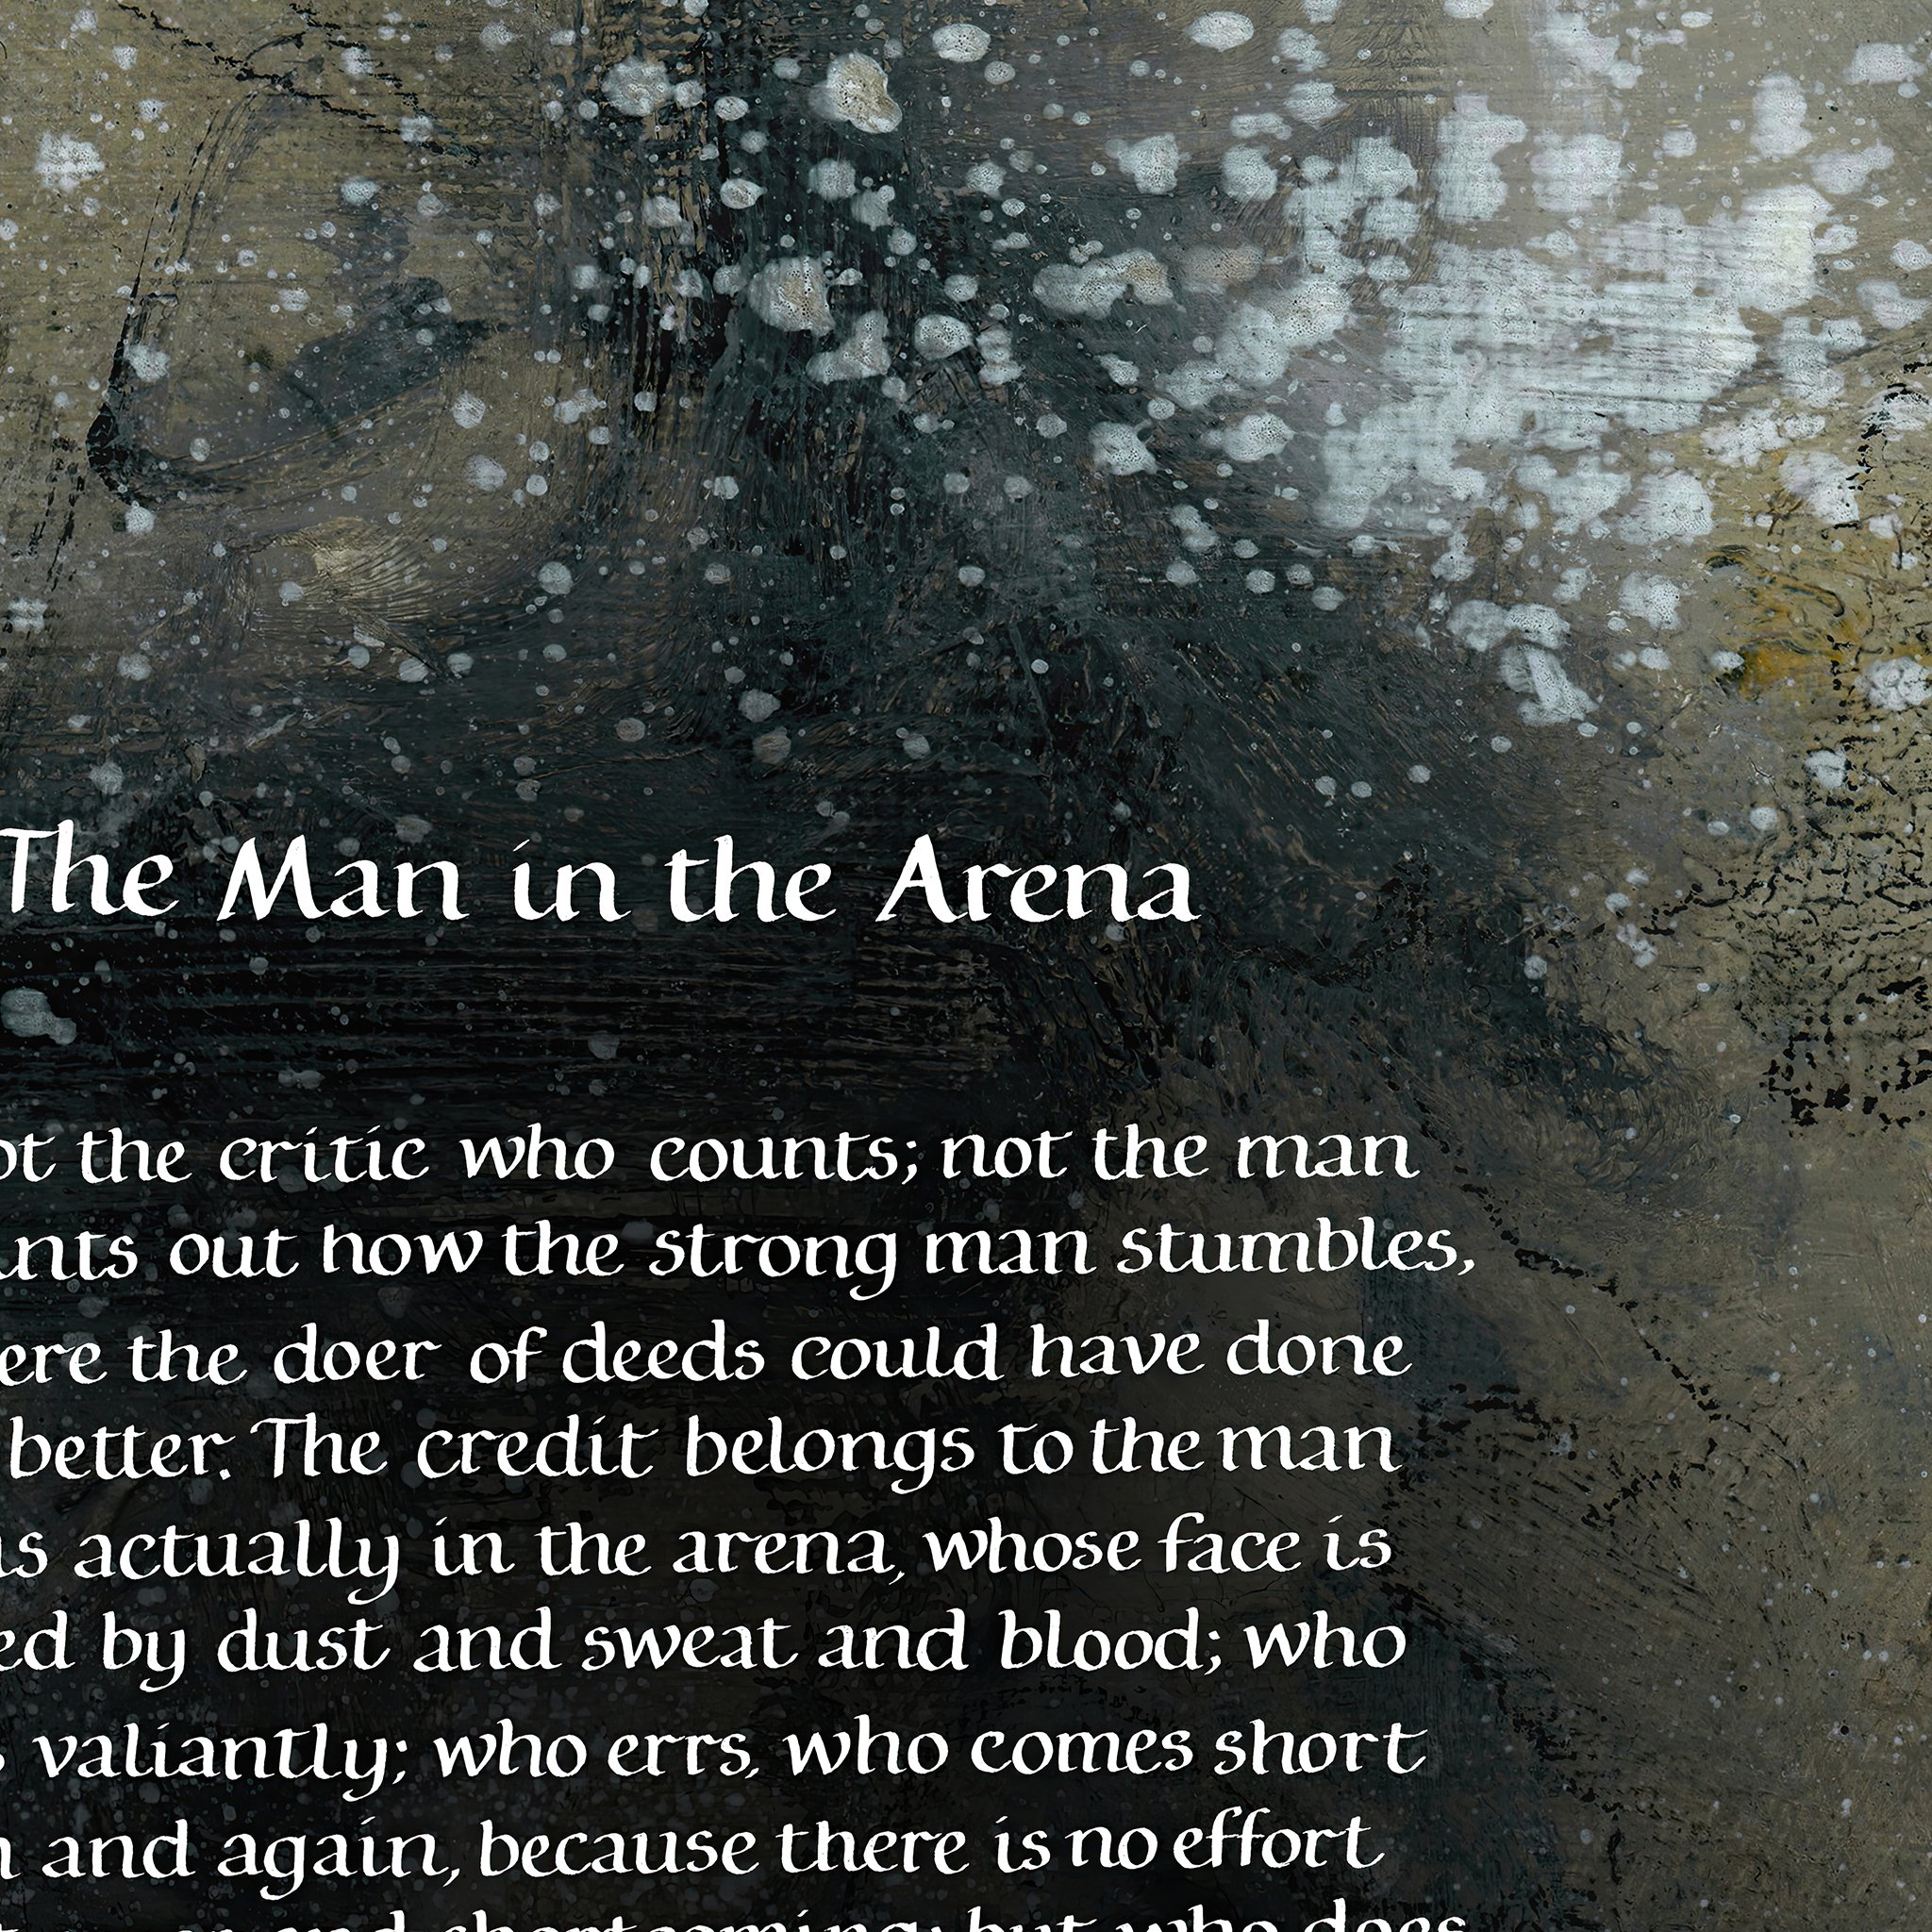 Man in the Arena close up 1.jpg